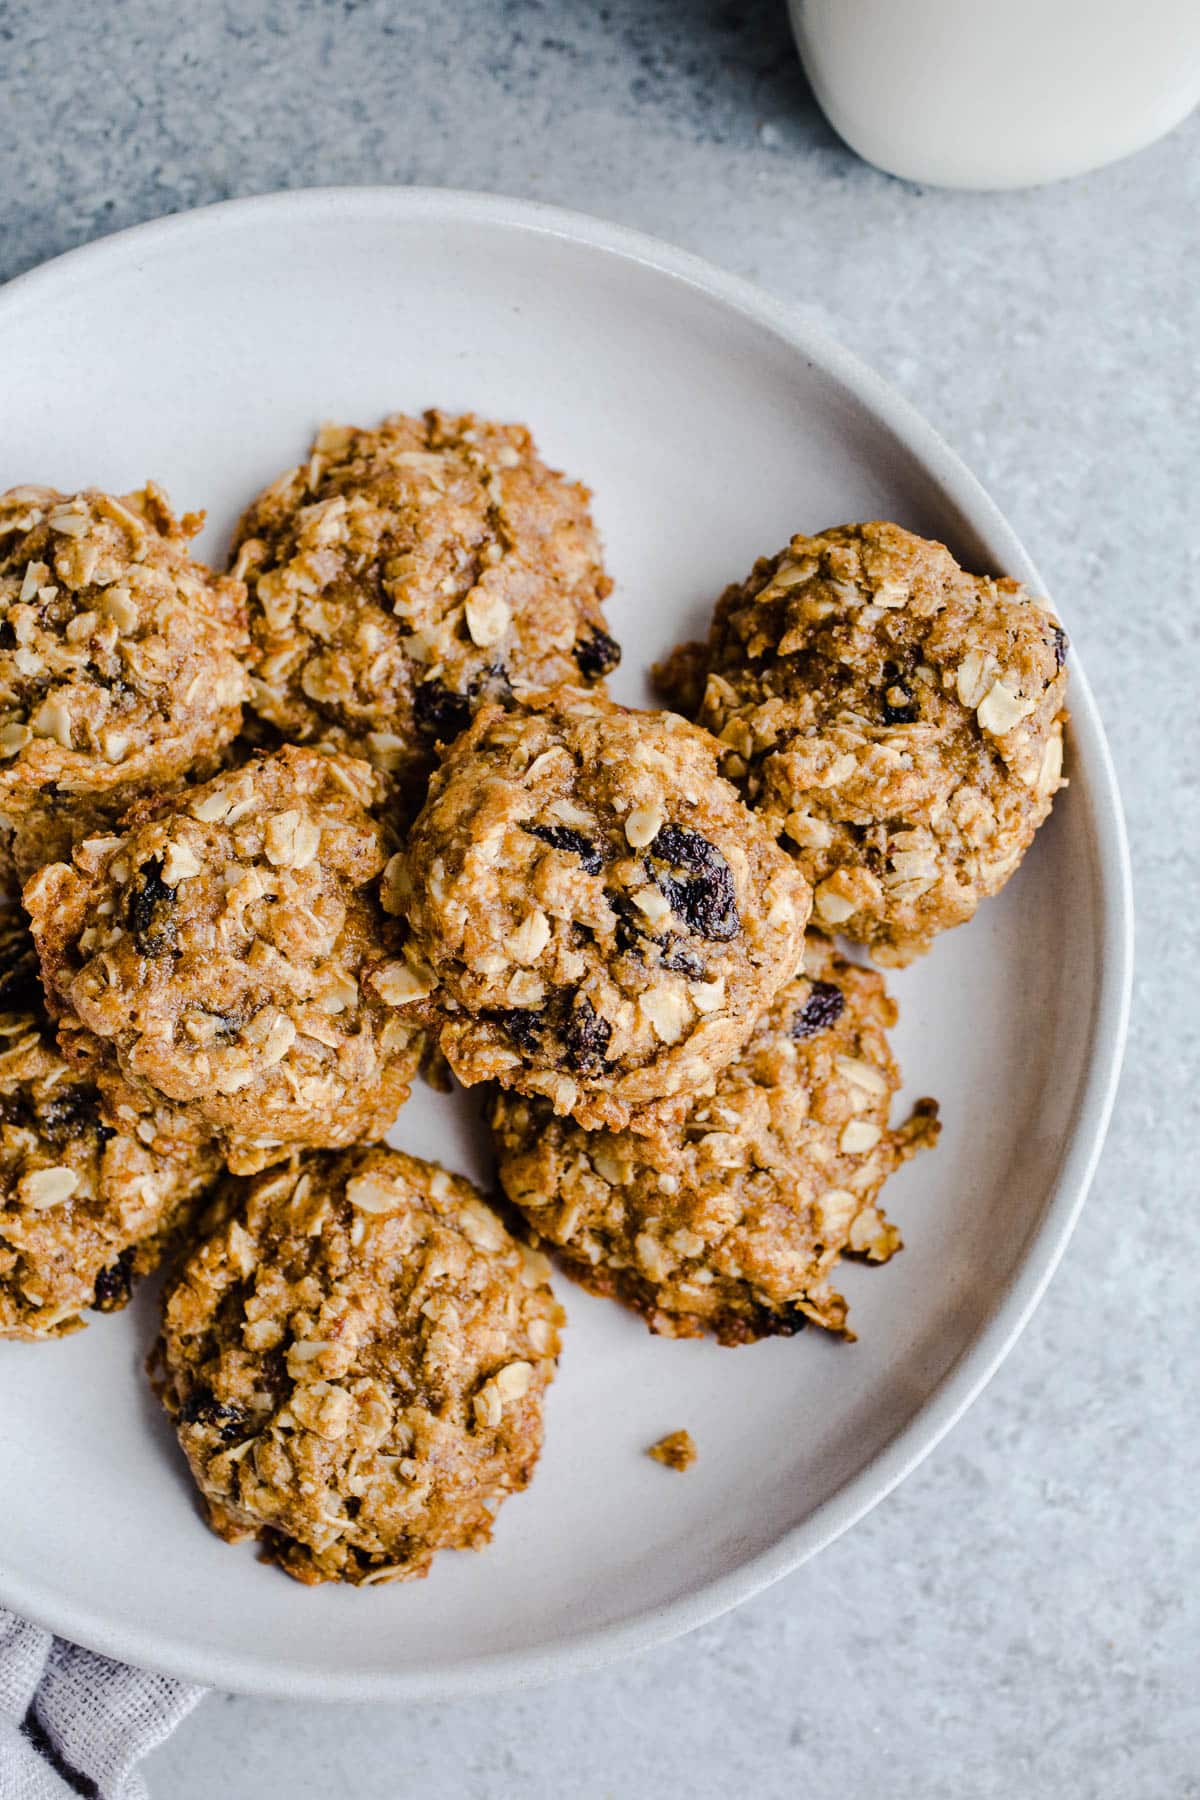 Oat cookies on a plate.